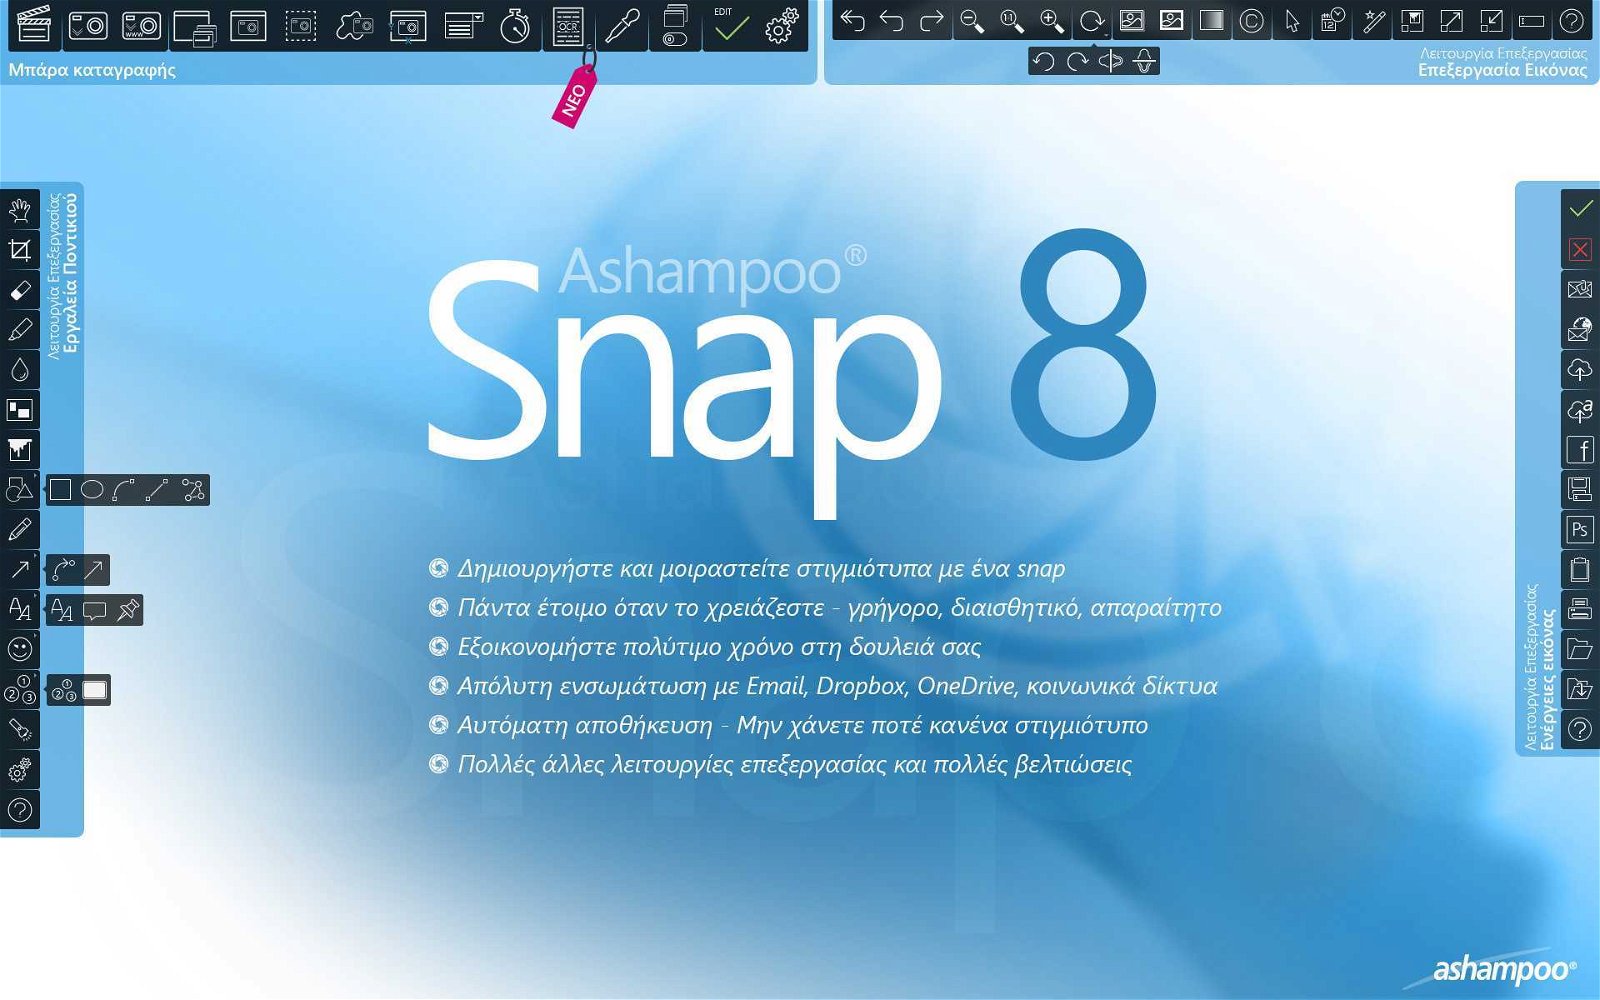 scr_ashampoo_snap_8_overview_functions_en